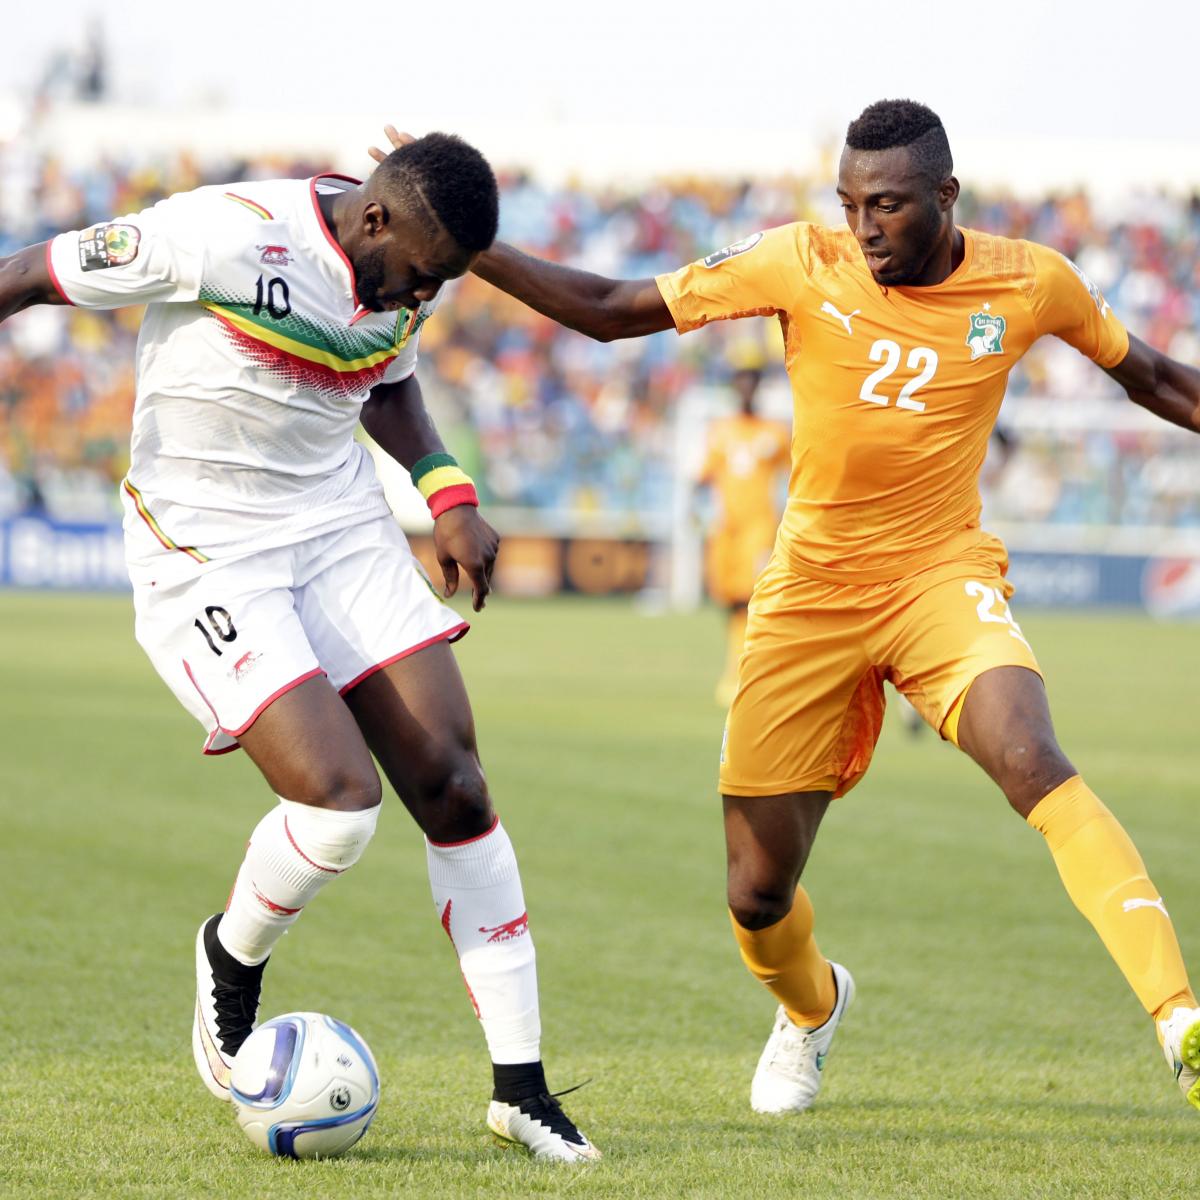 AFCON 2015: Day 8 Scores, Results, Standings and Africa Cup of Nations